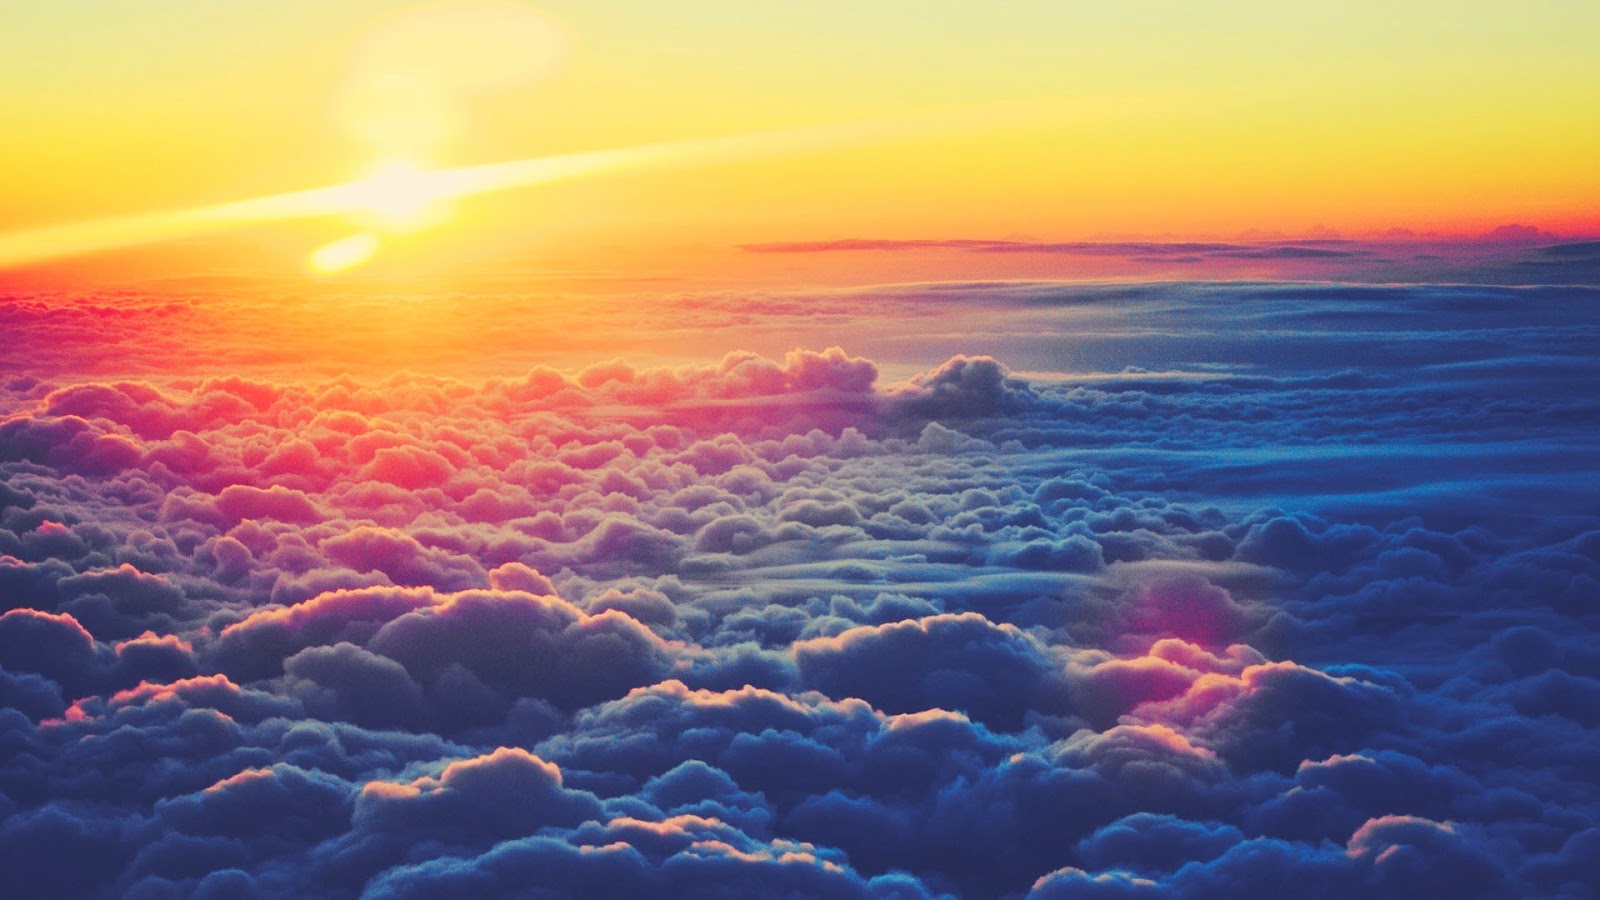 Sunrise Above The Clouds Wallpaper